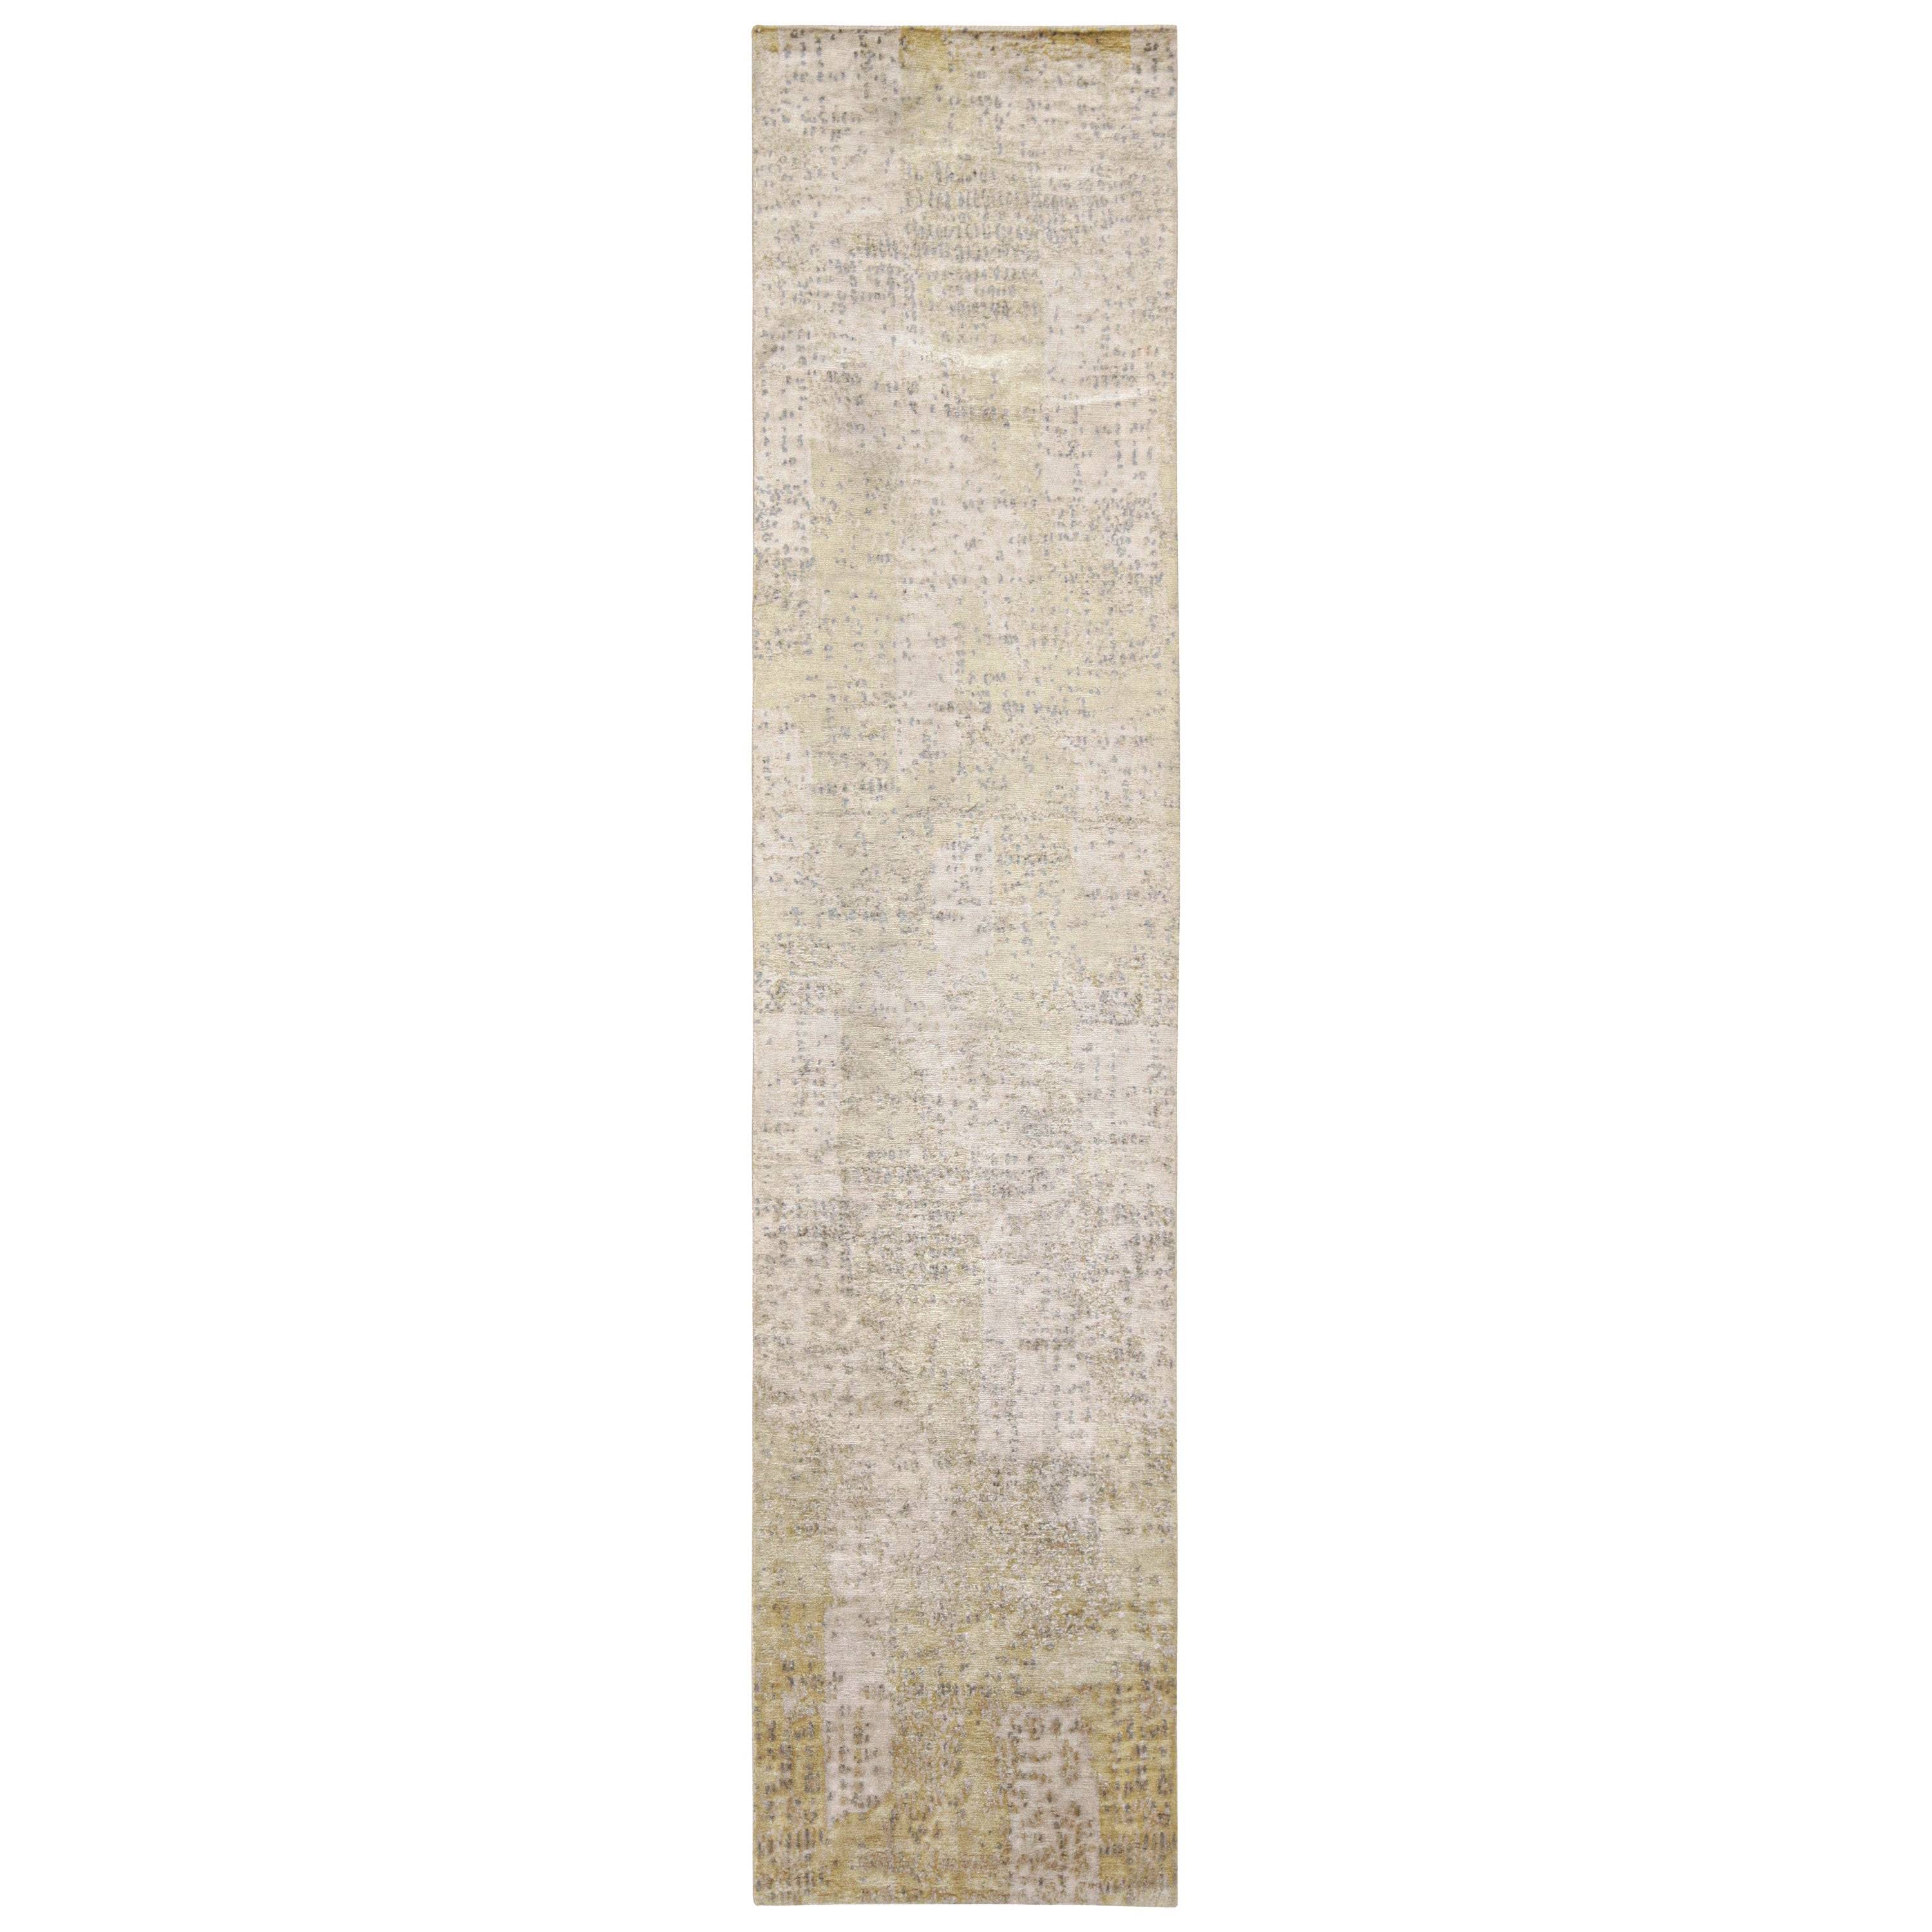 Rug & Kilim’s Abstract Runner in Silver-Gray with Ivory Tones